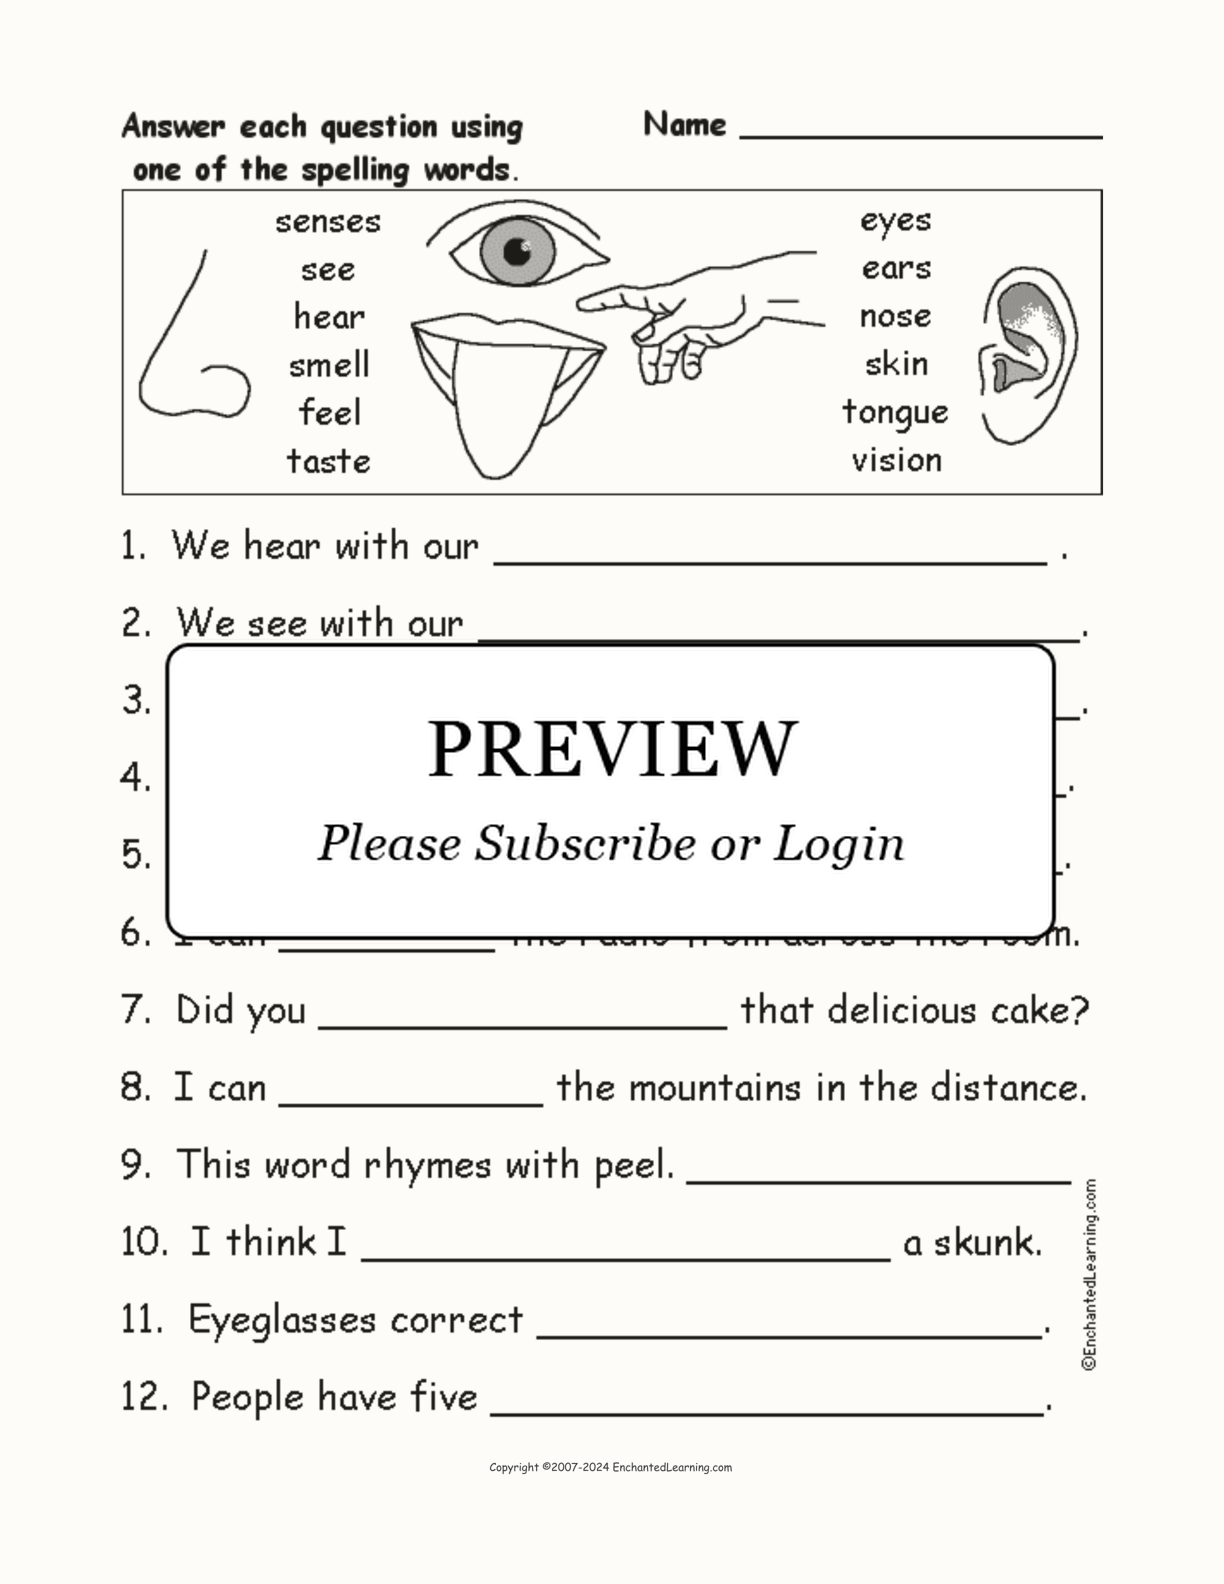 Senses Spelling Word Questions interactive worksheet page 1